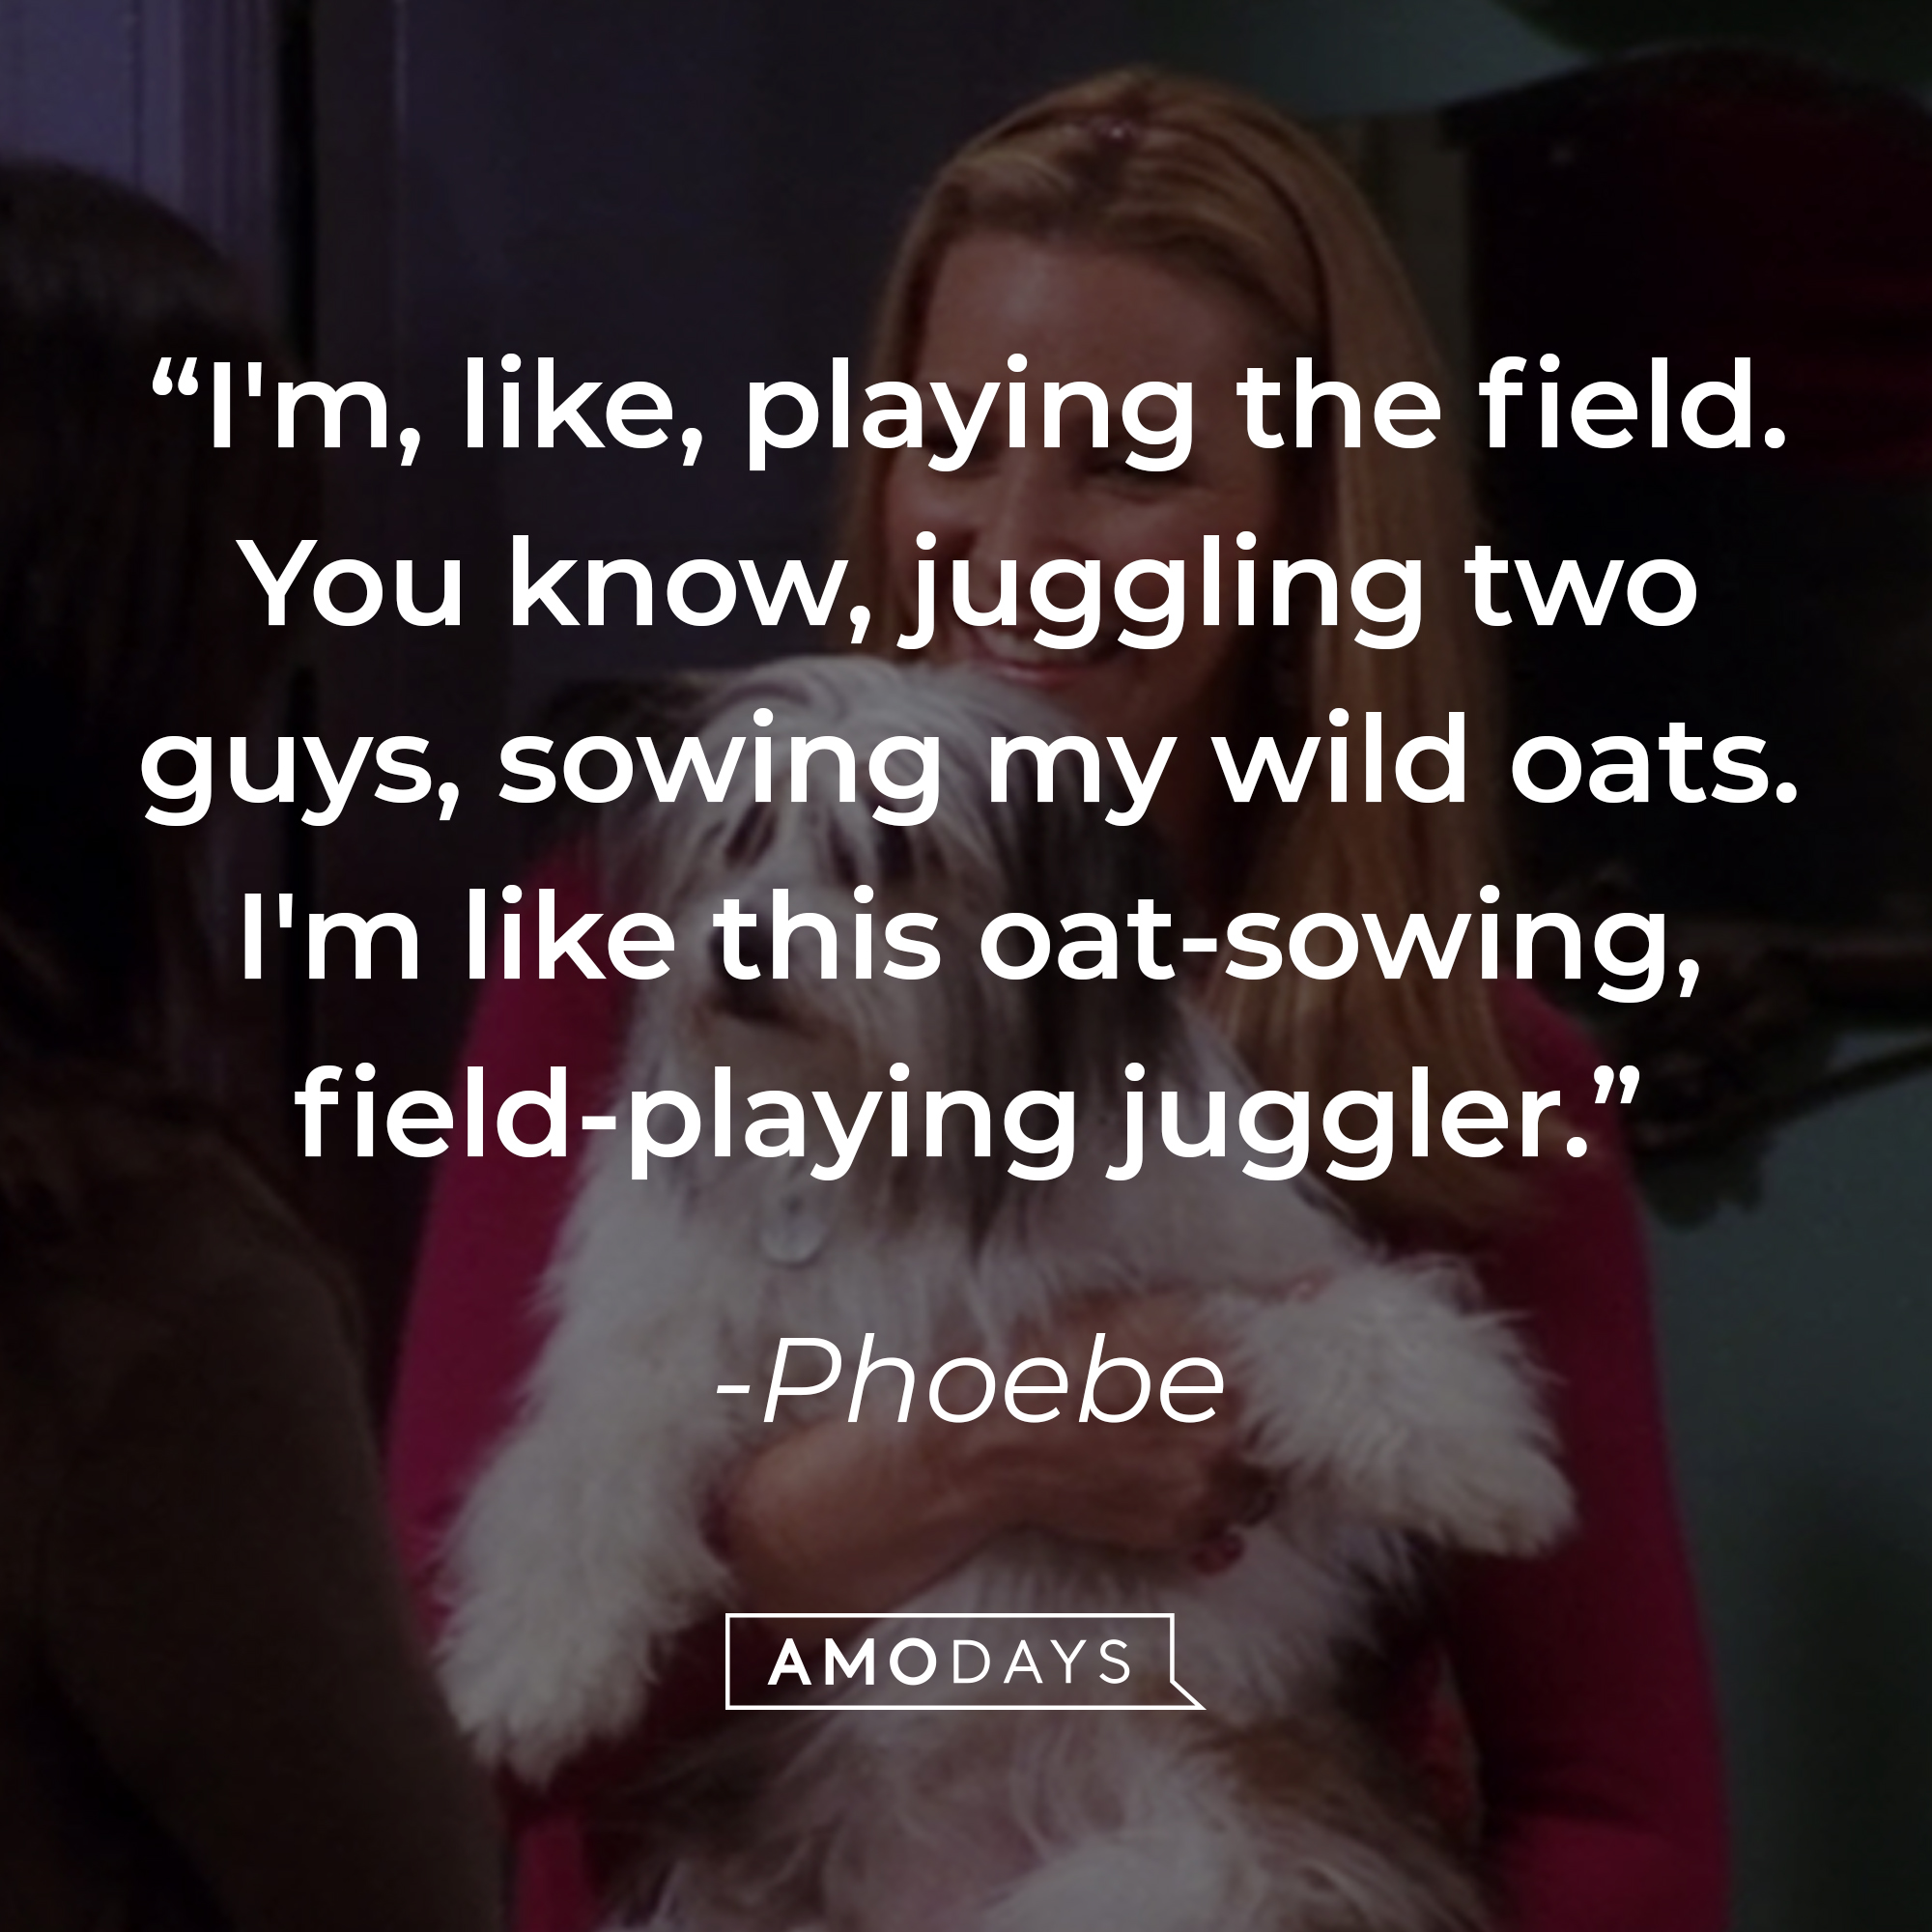 Phoebe's quote: "I'm, like, playing the field. You know, juggling two guys, sowing my wild oats. I'm like this oat-sowing, field-playing juggler." | Source: facebook.com/friends.tv